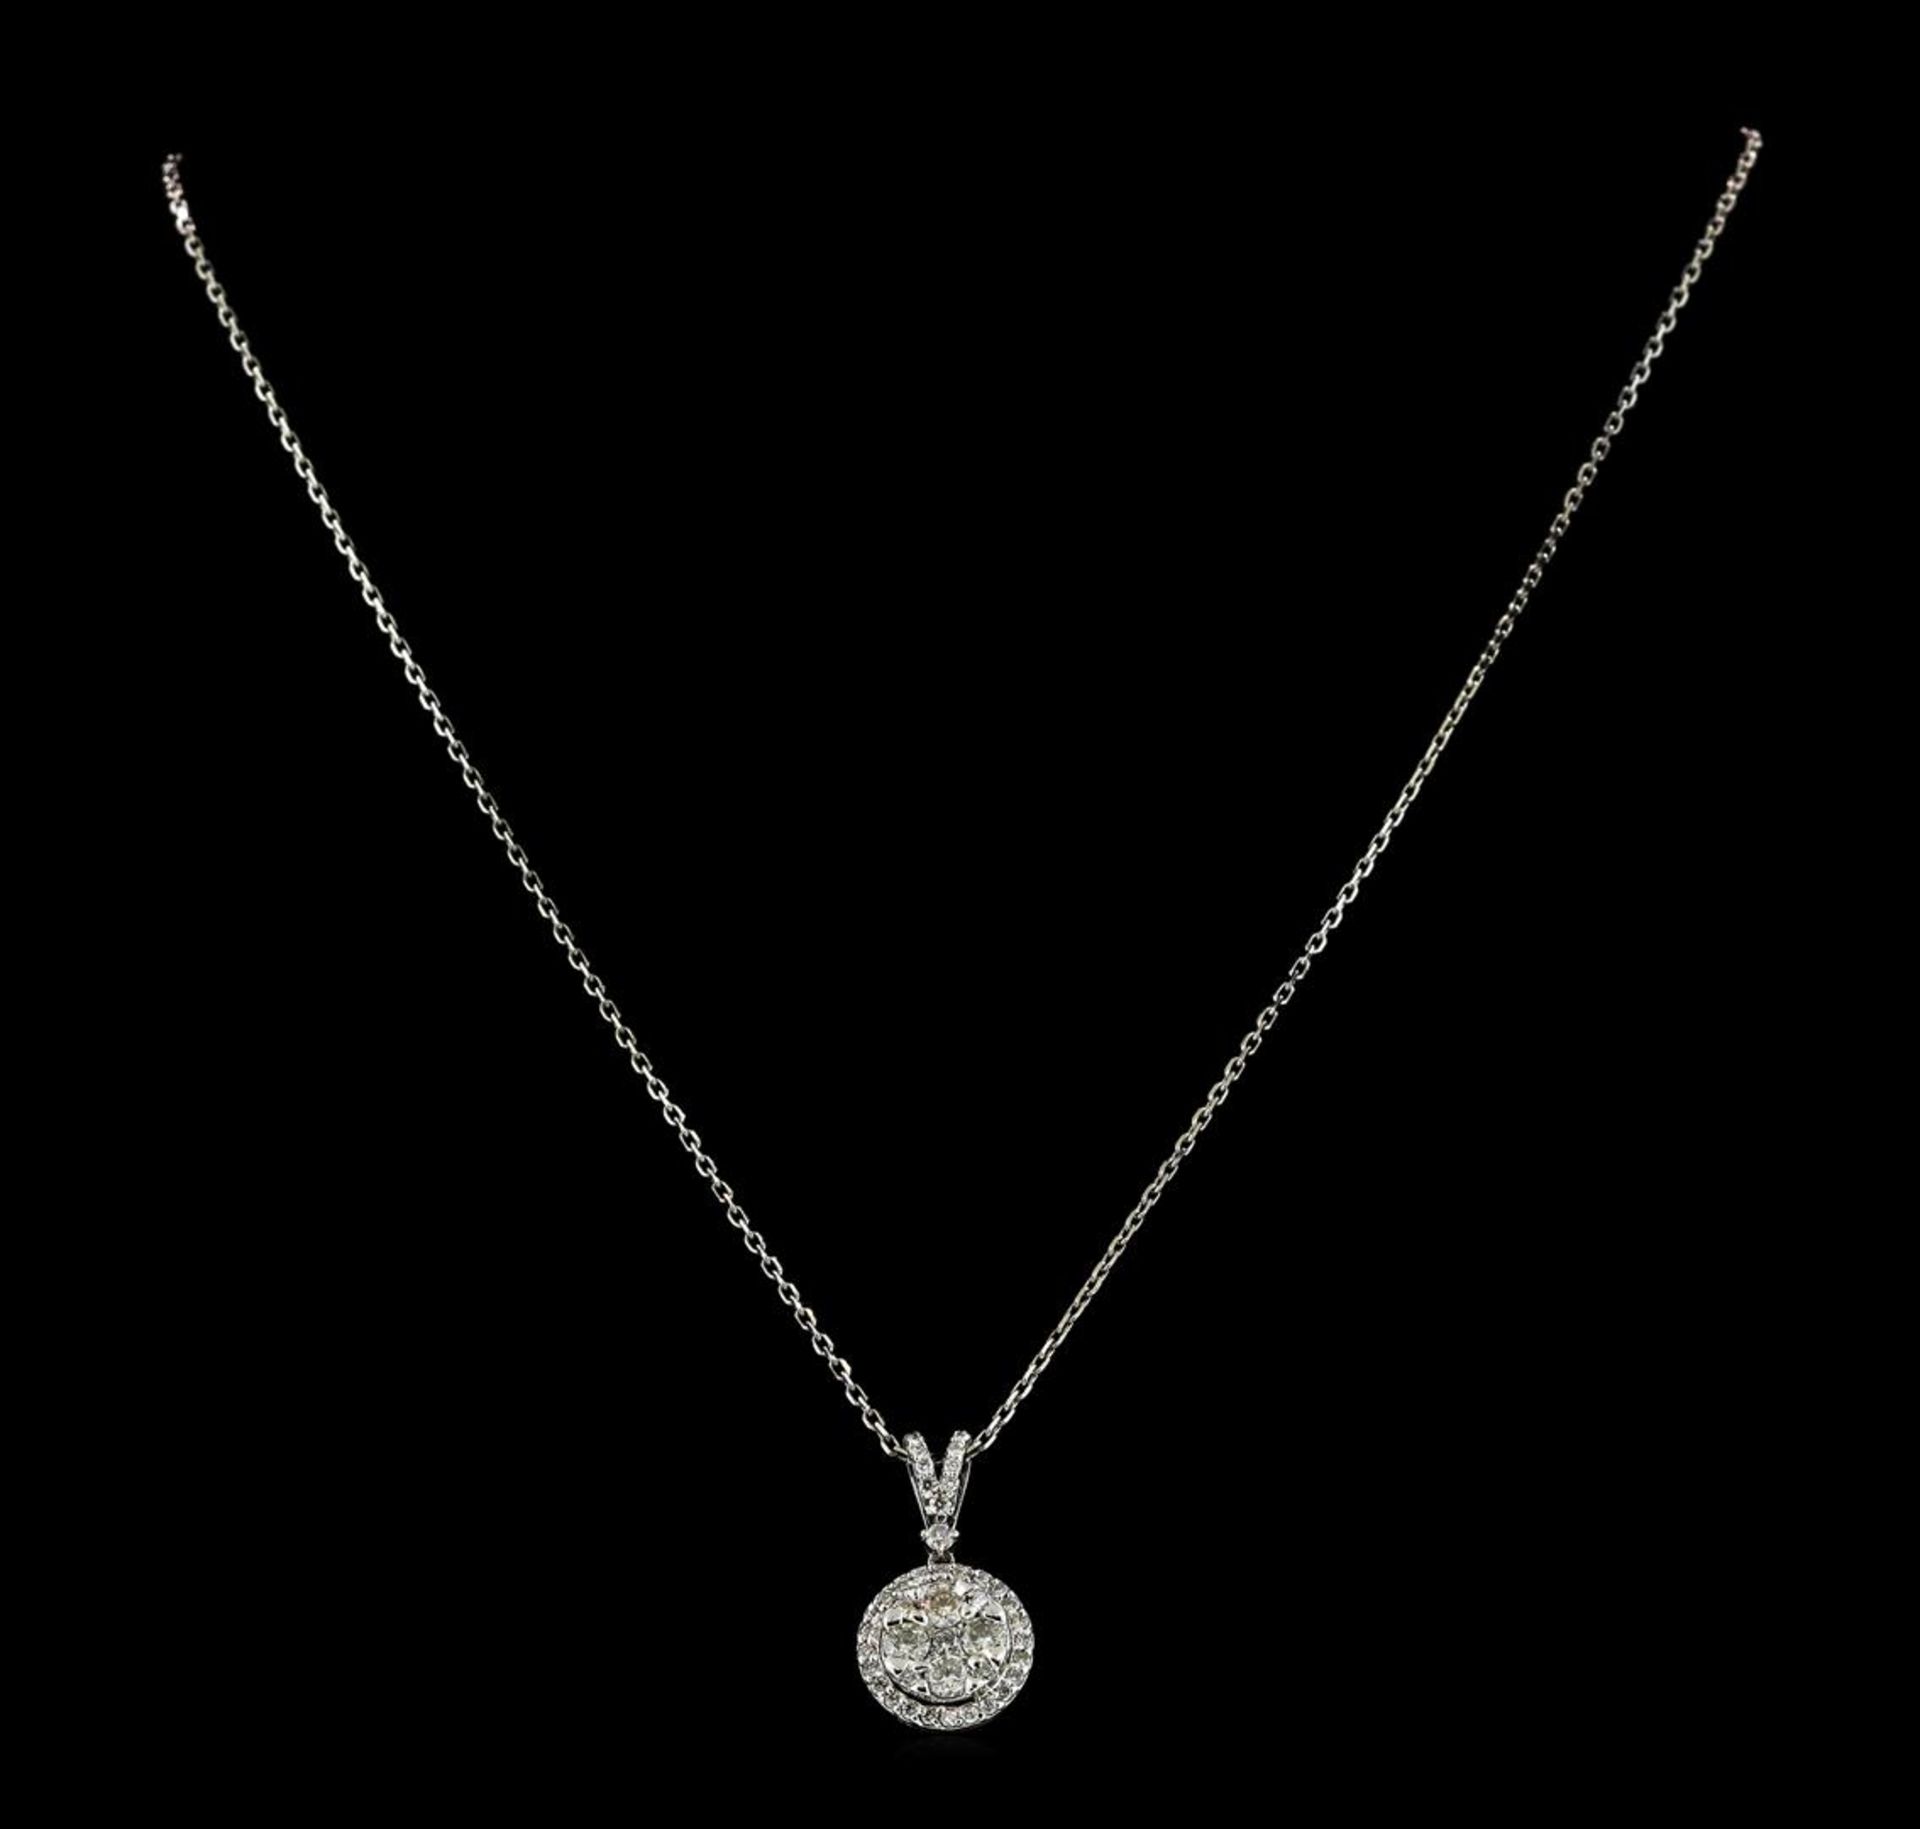 0.79 ctw Diamond Necklace - 14KT White Gold - Image 2 of 2